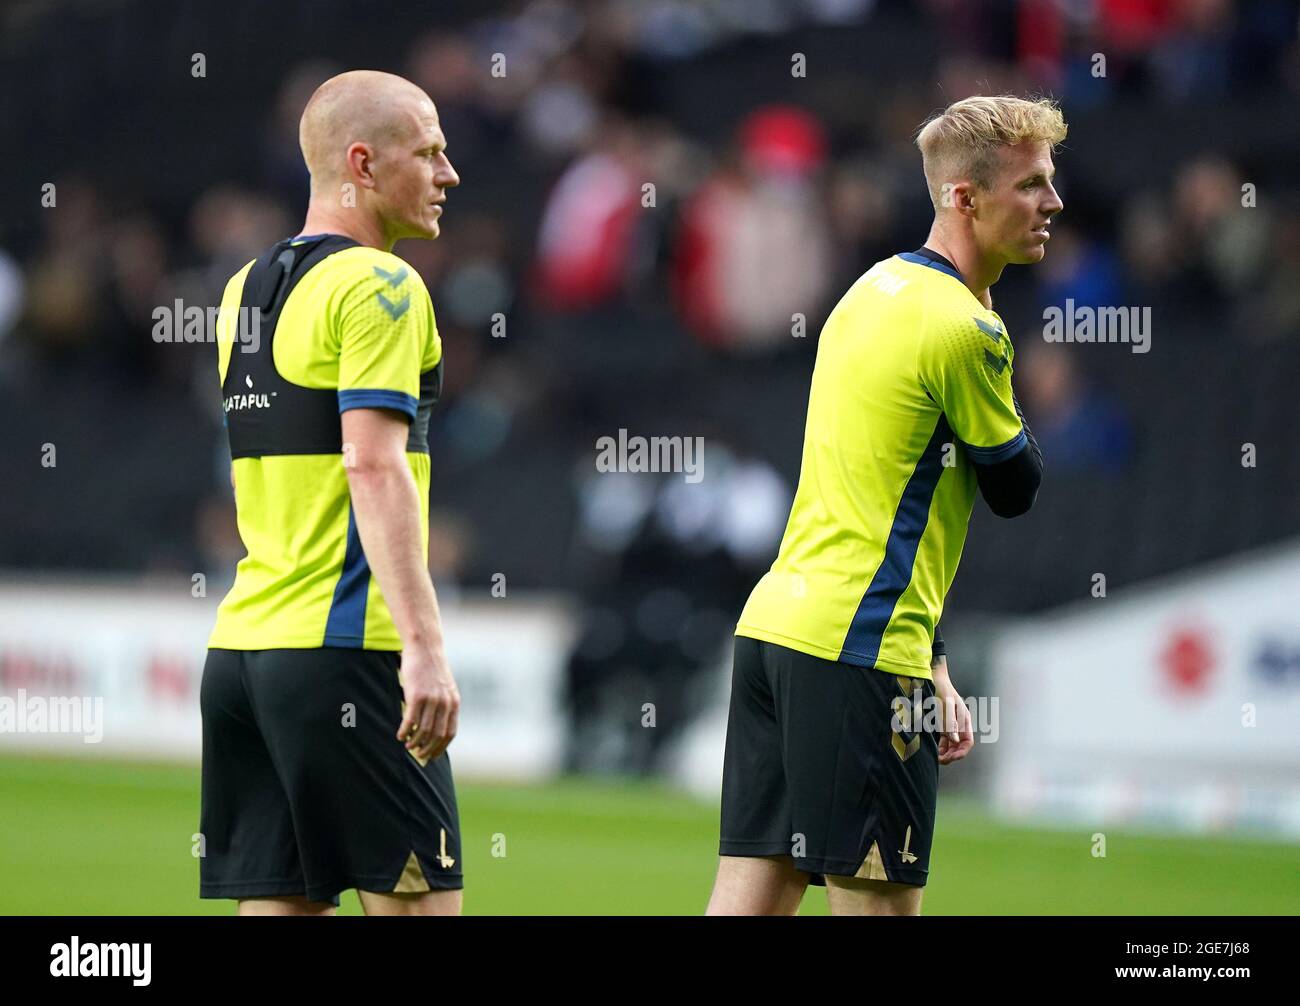 Charlton Athletic's Charlie Kirk (right) and Ben Watson warming up prior to kick-off during the Sky Bet League One match at Stadium MK, Milton Keynes. Picture date: Tuesday August 17, 2021. Stock Photo